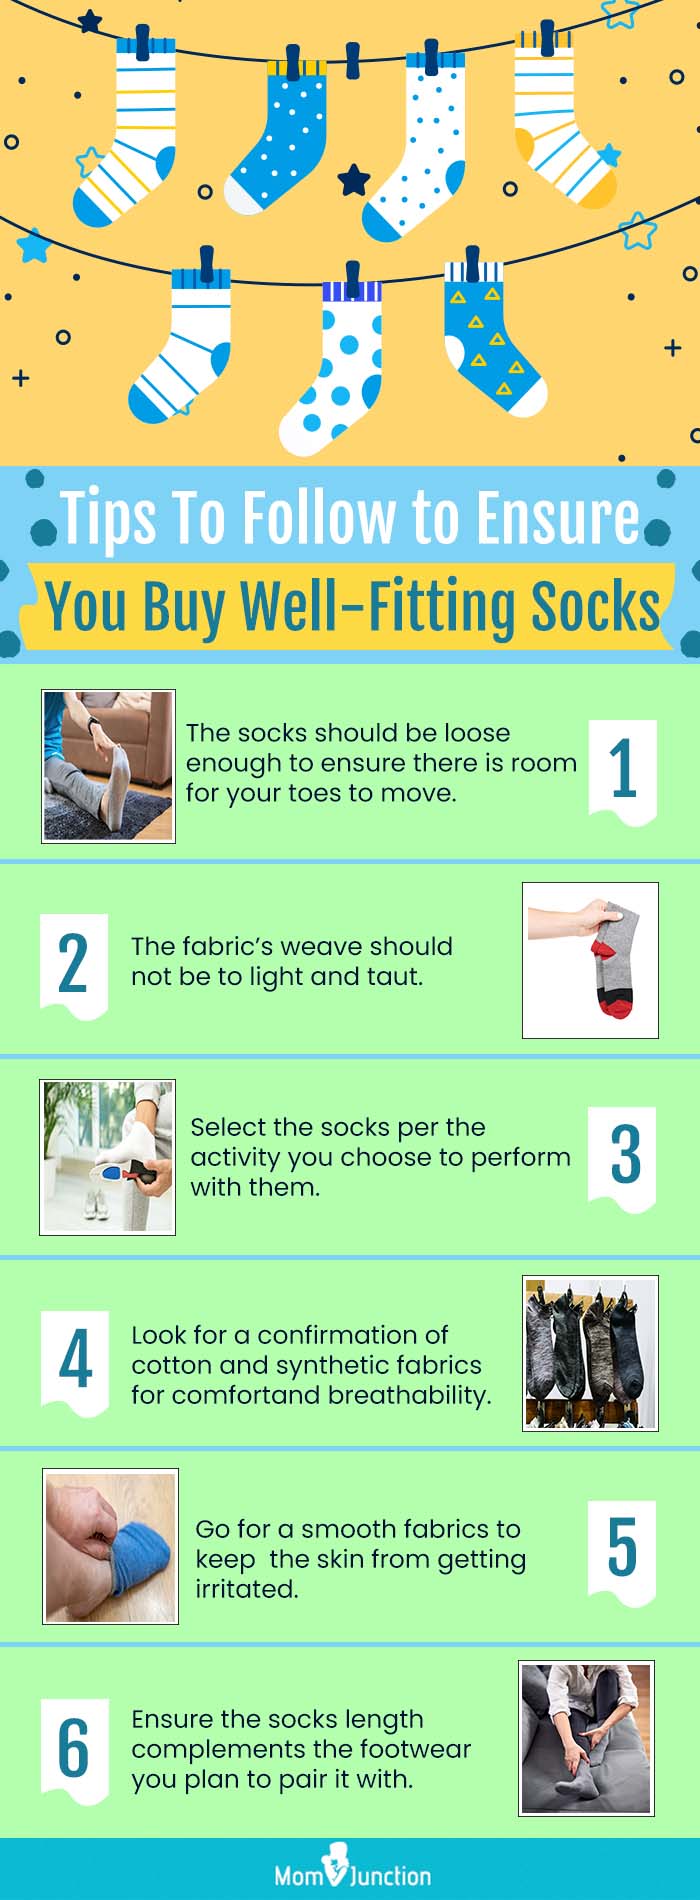 tips to follow to ensure you buy well-fitting socks (infographic)